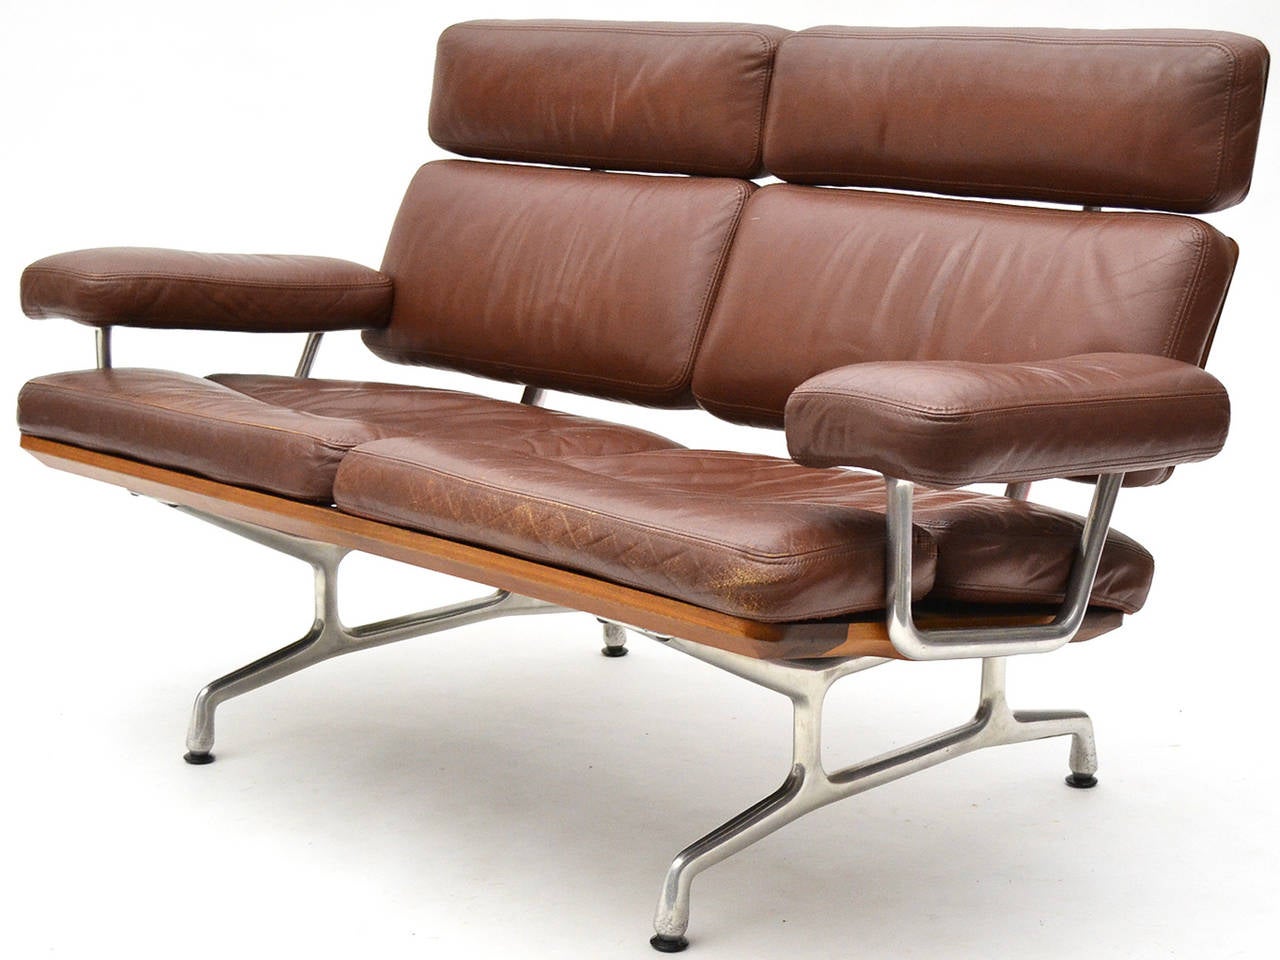 The teak sofa by Charles and Ray Eames was the last design the husband and wife team created. Originally conceived in the 1970s, the sofa shares characteristics with several other Eames designs including the sofa compact, the later model 3473 sofa,